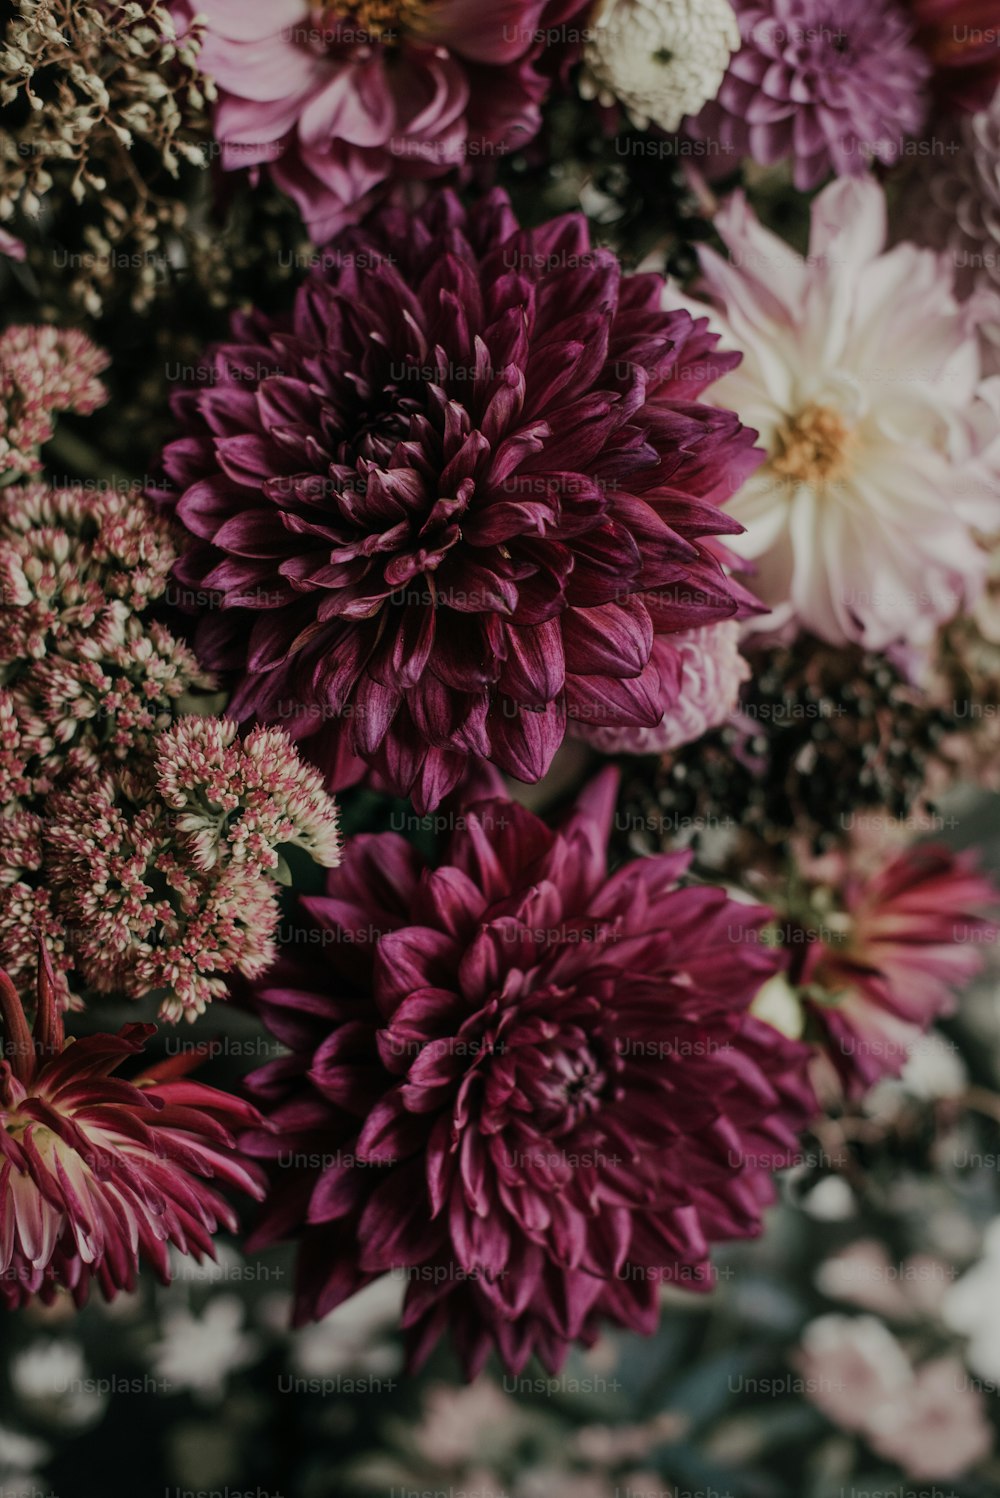 a close up of a bunch of flowers